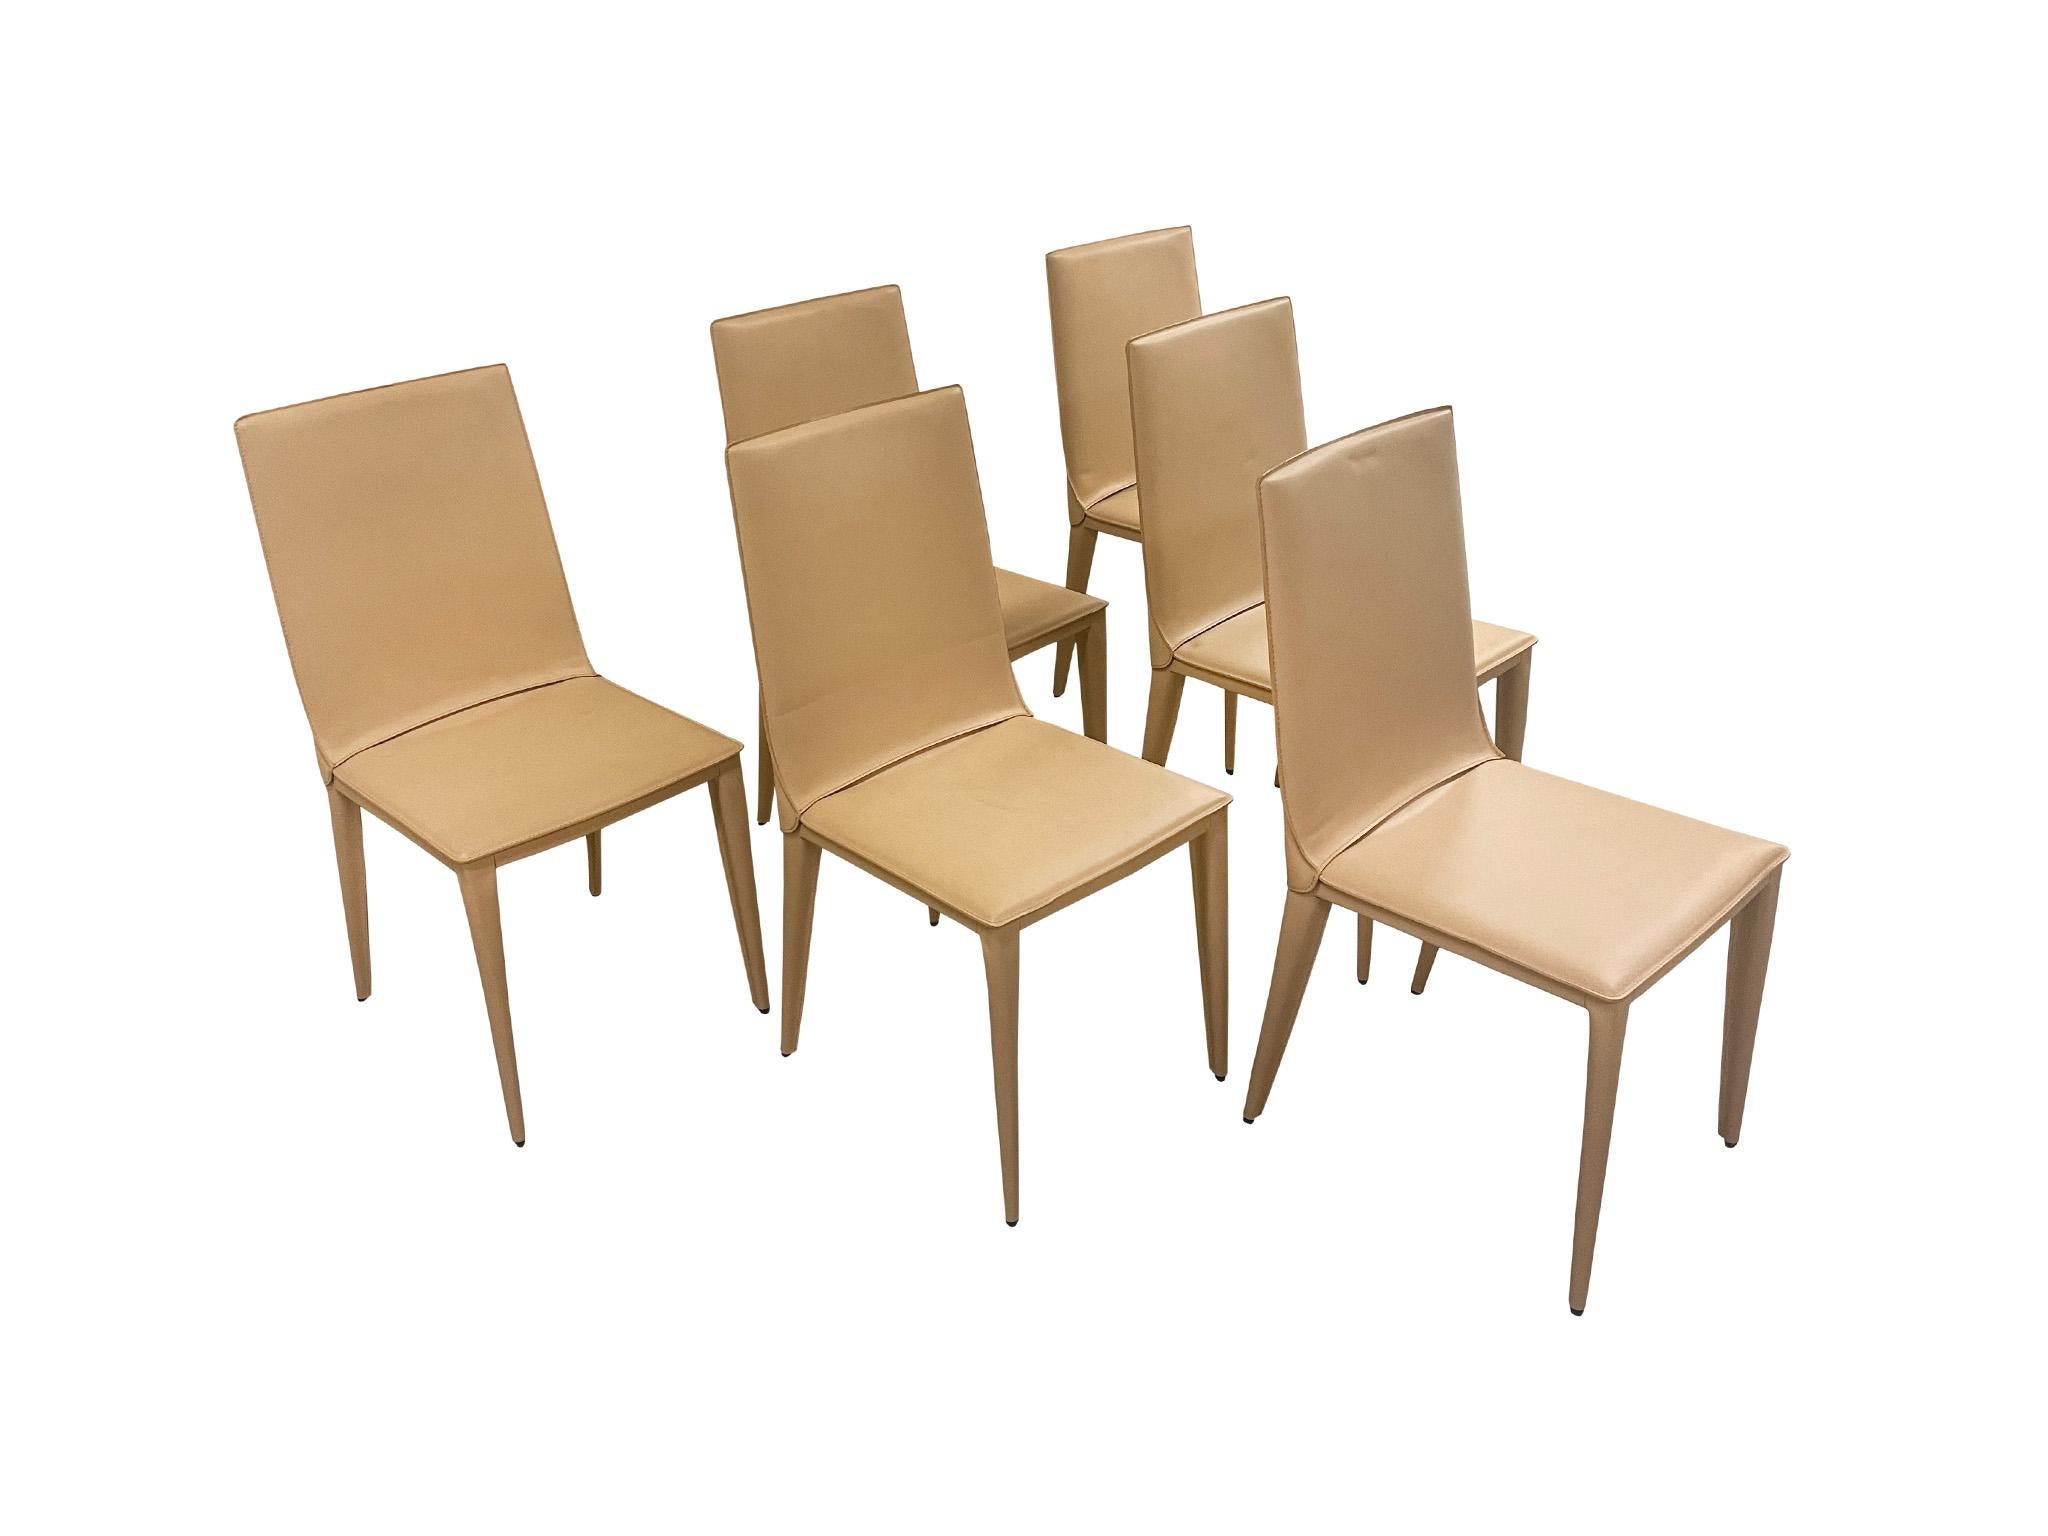 Designed by Renzo Fauciglietti & Graziella Bianchi for Frag, these 6 Italian Bottega dining chairs were made in the early 2000s. They are comprised of a steel frame wrapped in a cream-tan leather and with light padding.

Dimensions:
17.75 in.